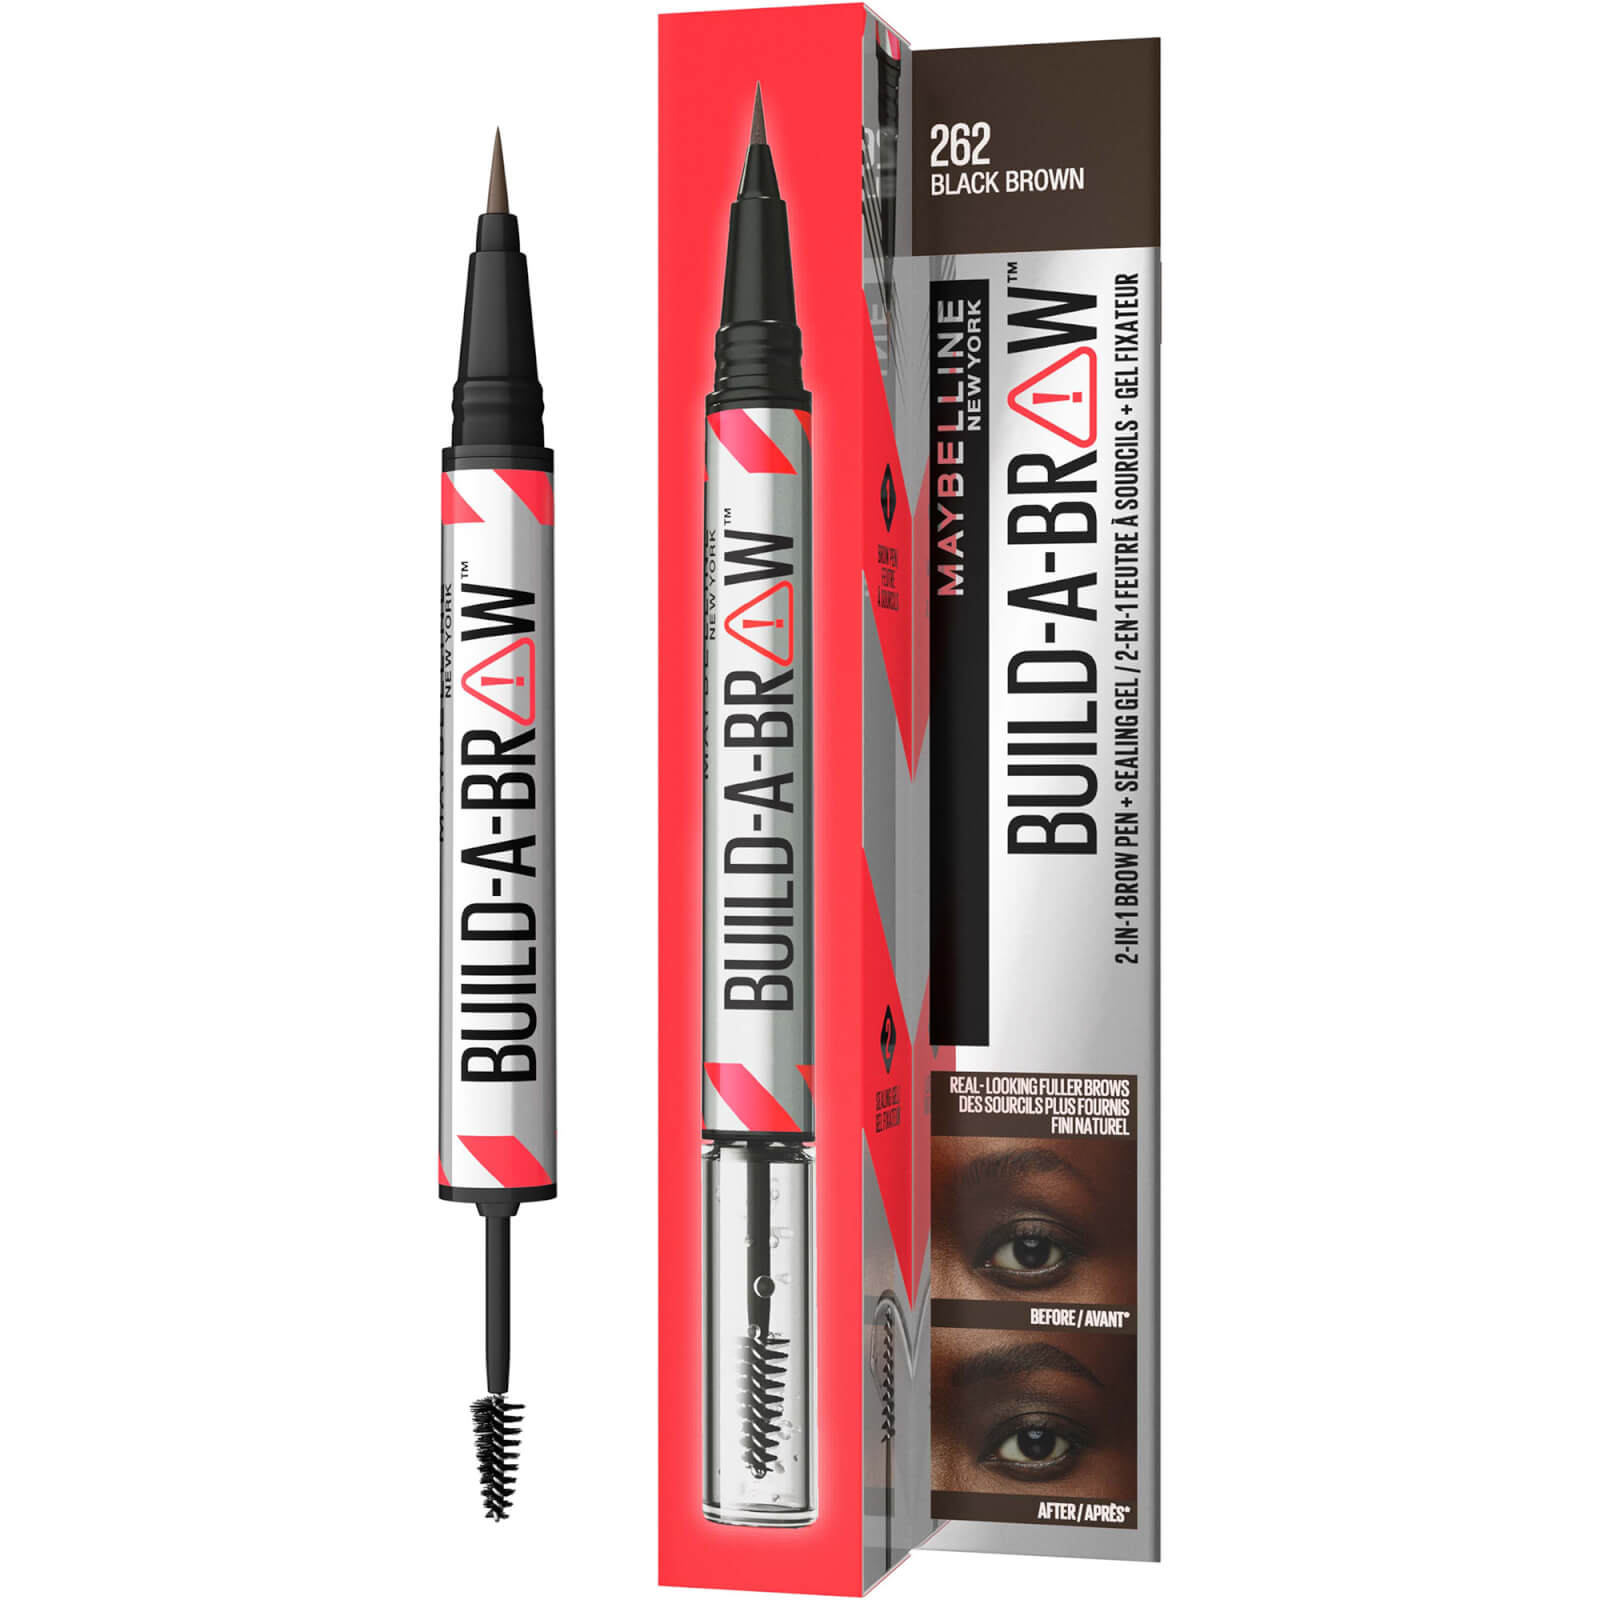 Maybelline Build-A-Brow 2 Easy Steps Eye Brow Pencil and Gel (Various Shades) - Black Brown